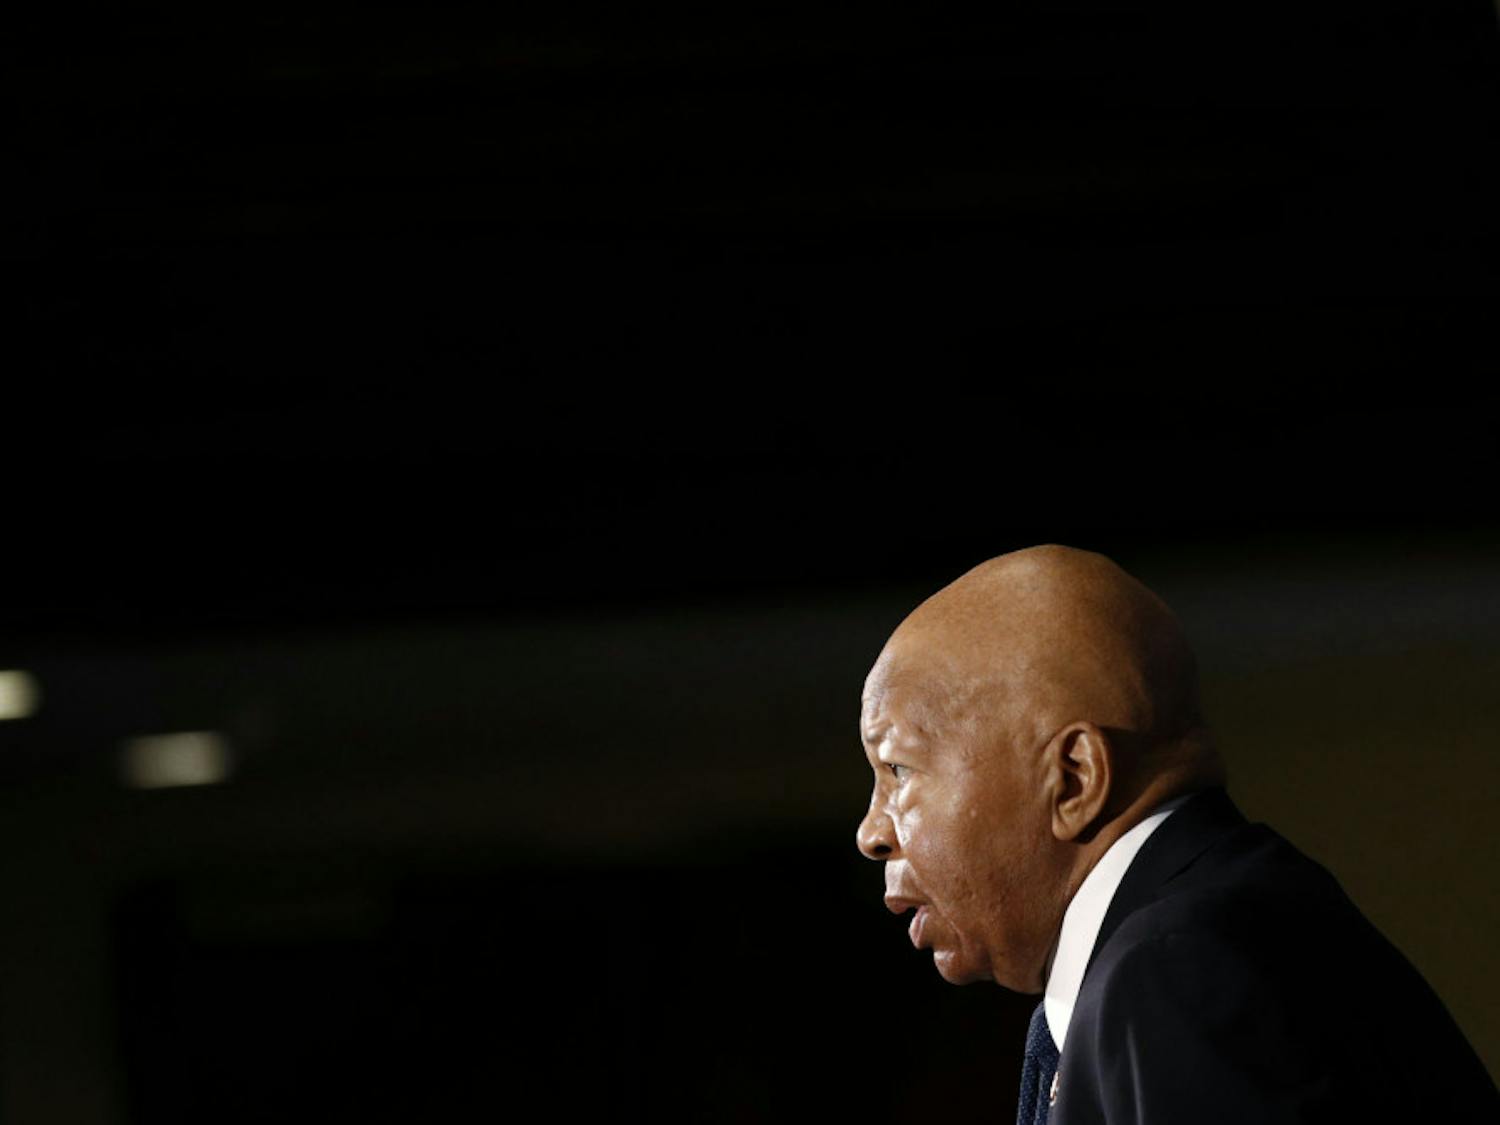 FILE - In this Aug. 7, 2019, file photo, Rep. Elijah Cummings, D-Md., speaks during a luncheon at the National Press Club in Washington. Cummings, a sharecropper's son who rose to become the powerful chairman of one of the U.S. House committees leading an impeachment inquiry of President Donald Trump, died Thursday, Oct. 17, 2019, of complications from longstanding health issues. He was 68. (AP Photo/Patrick Semansky, File)